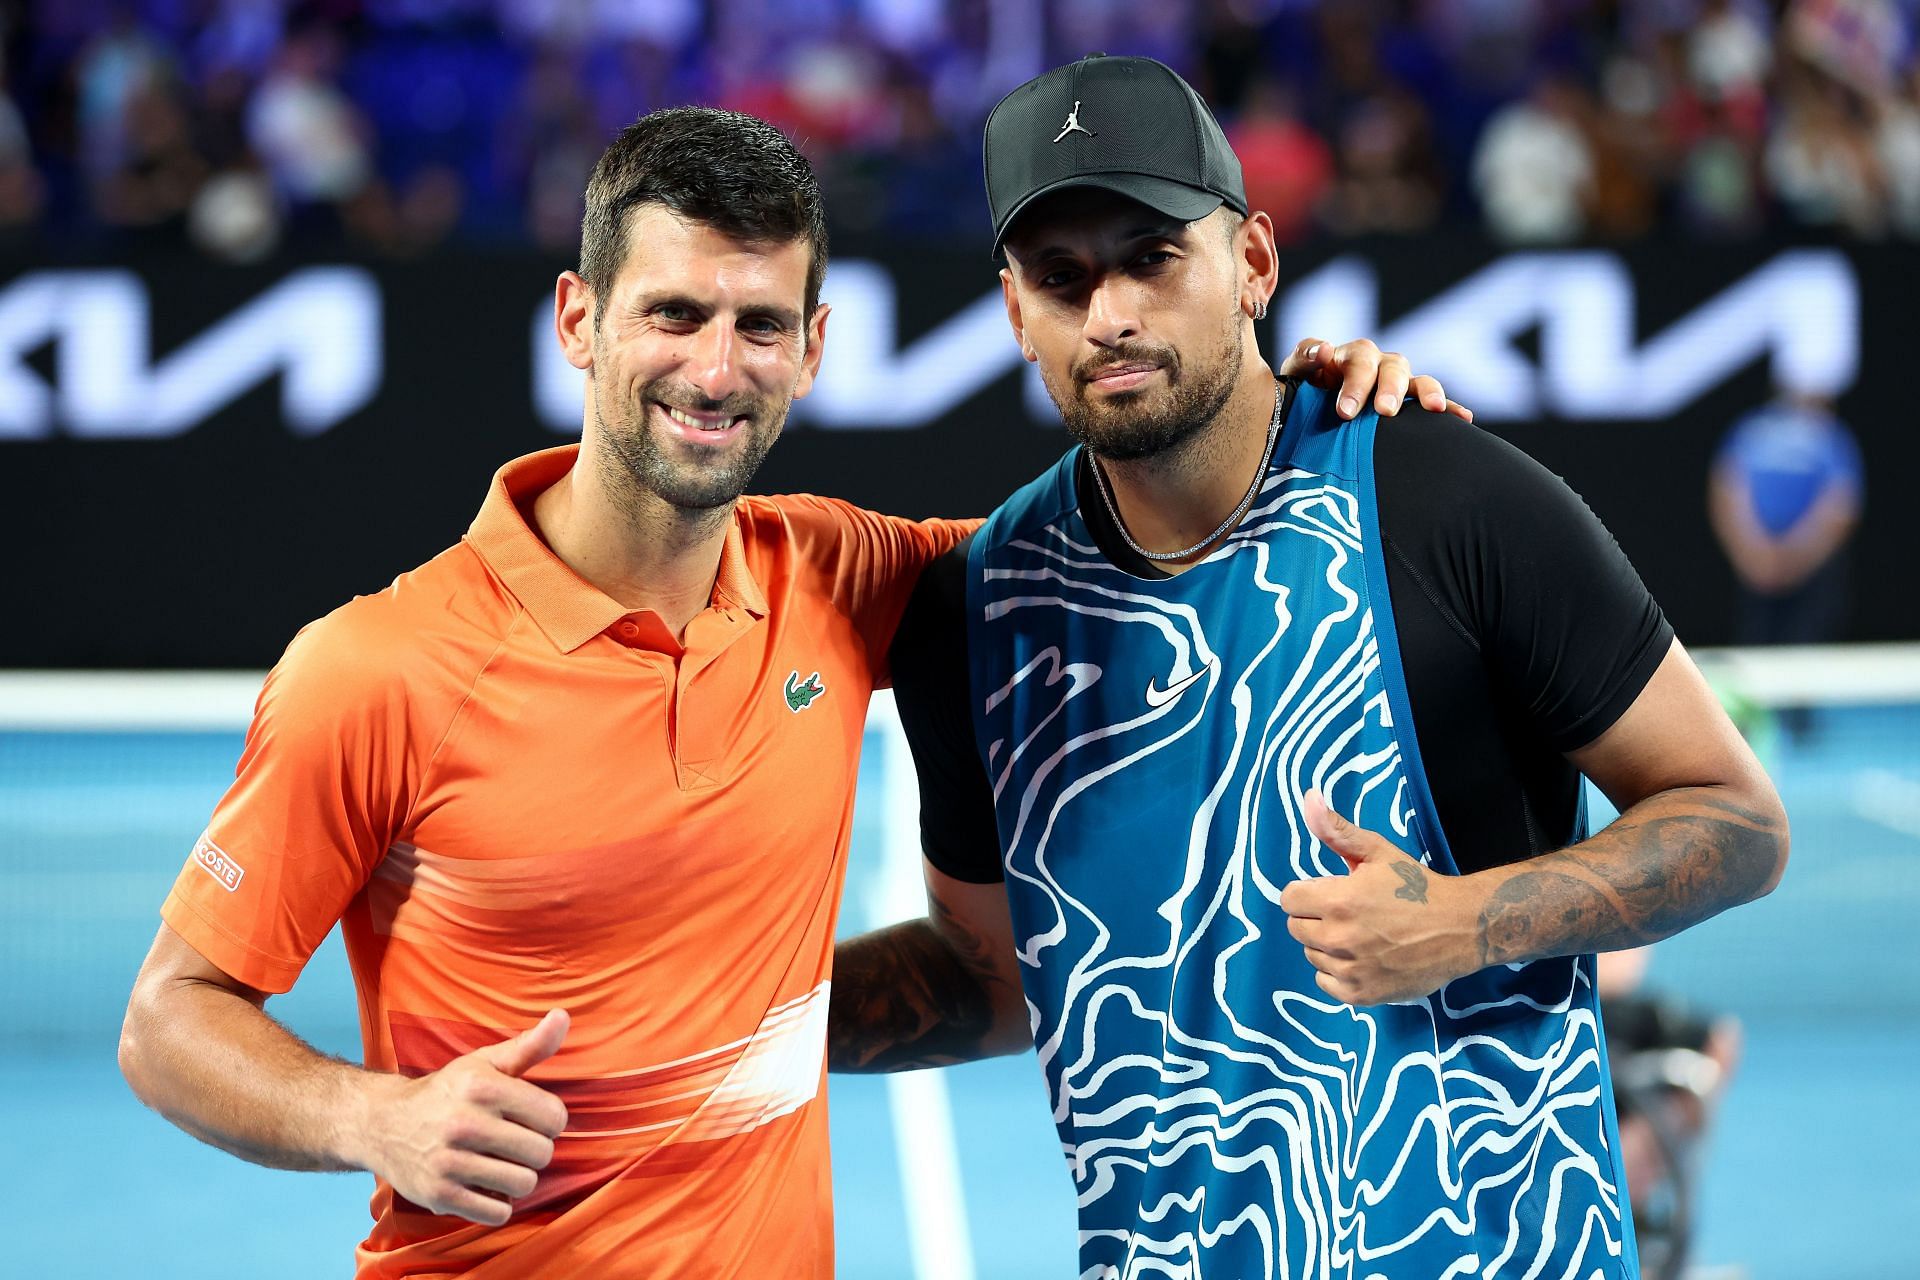 Novak Djokovic and Nick Kyrgios pictured at the 2023 Australian Open practice match.